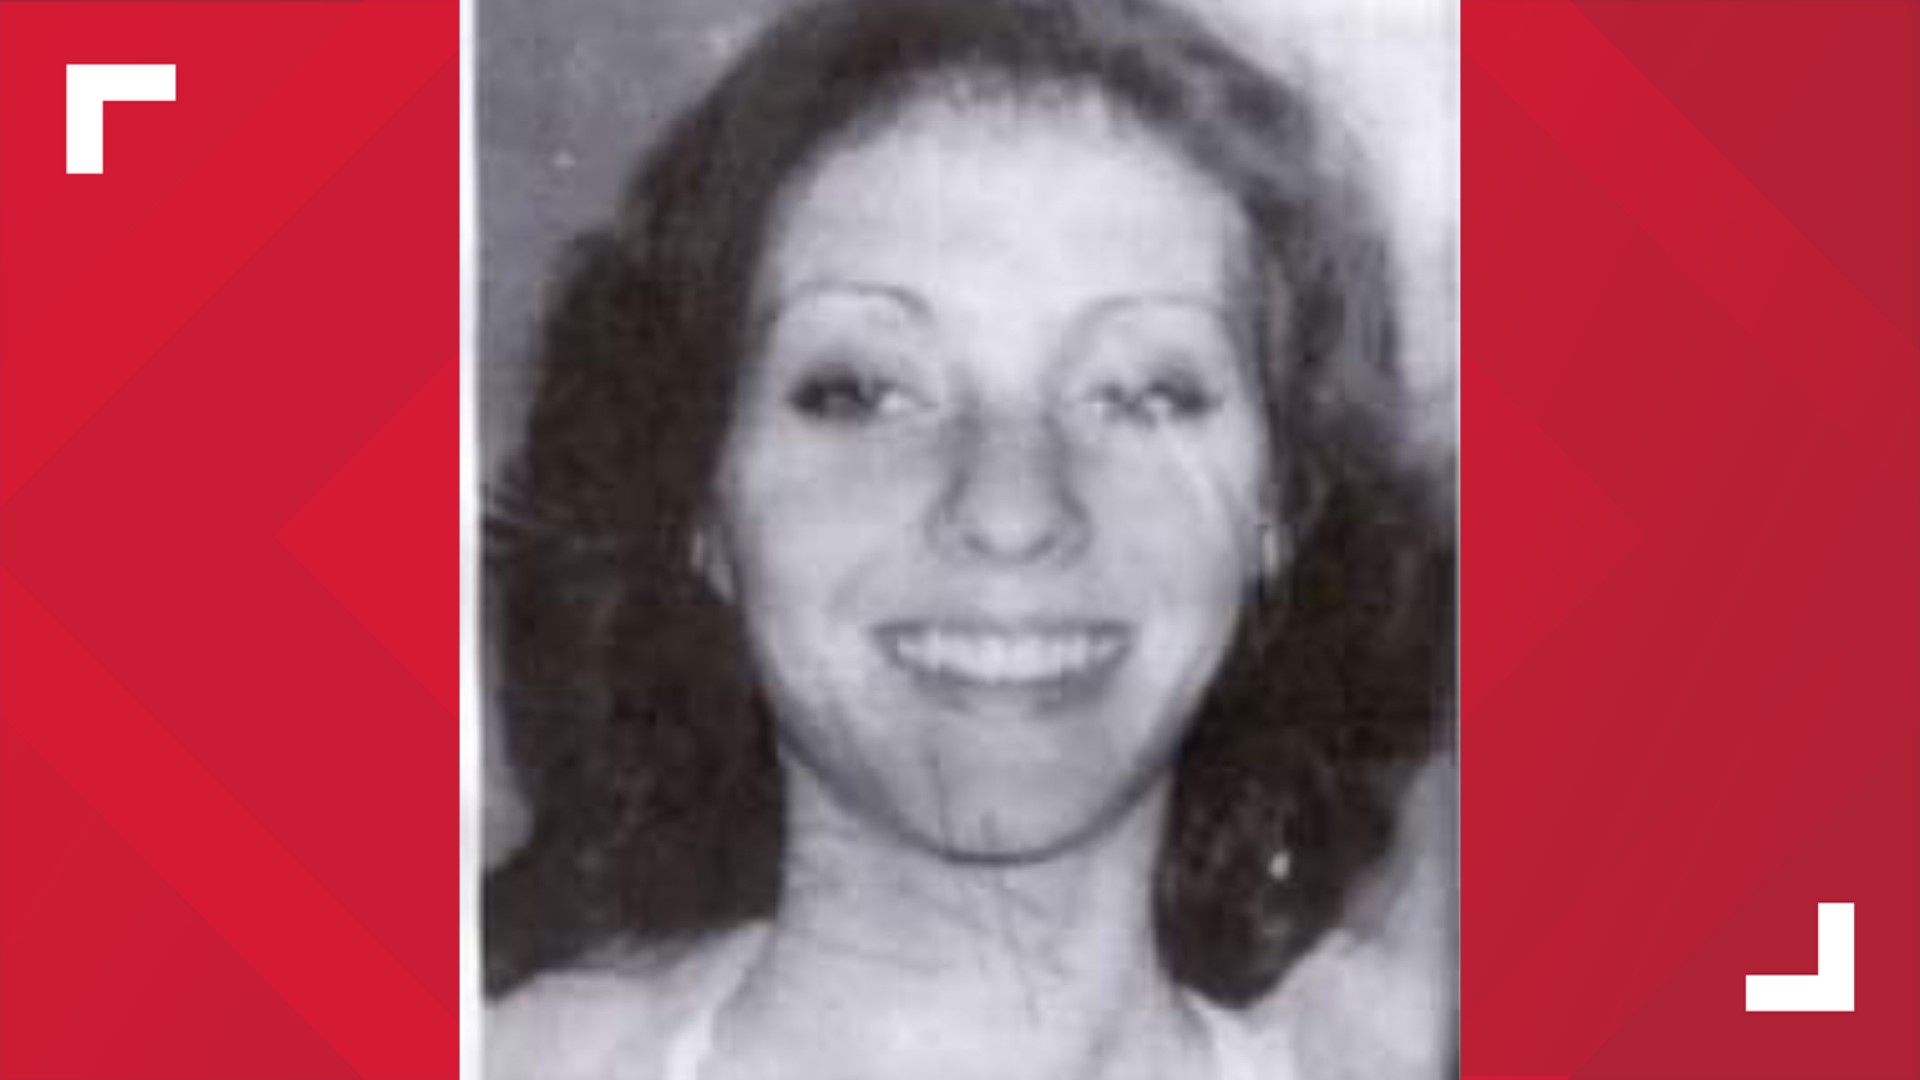 Jeannette Drzewiecki disappeared from Odessa in the 1980s, less than two weeks after giving birth to a daughter.